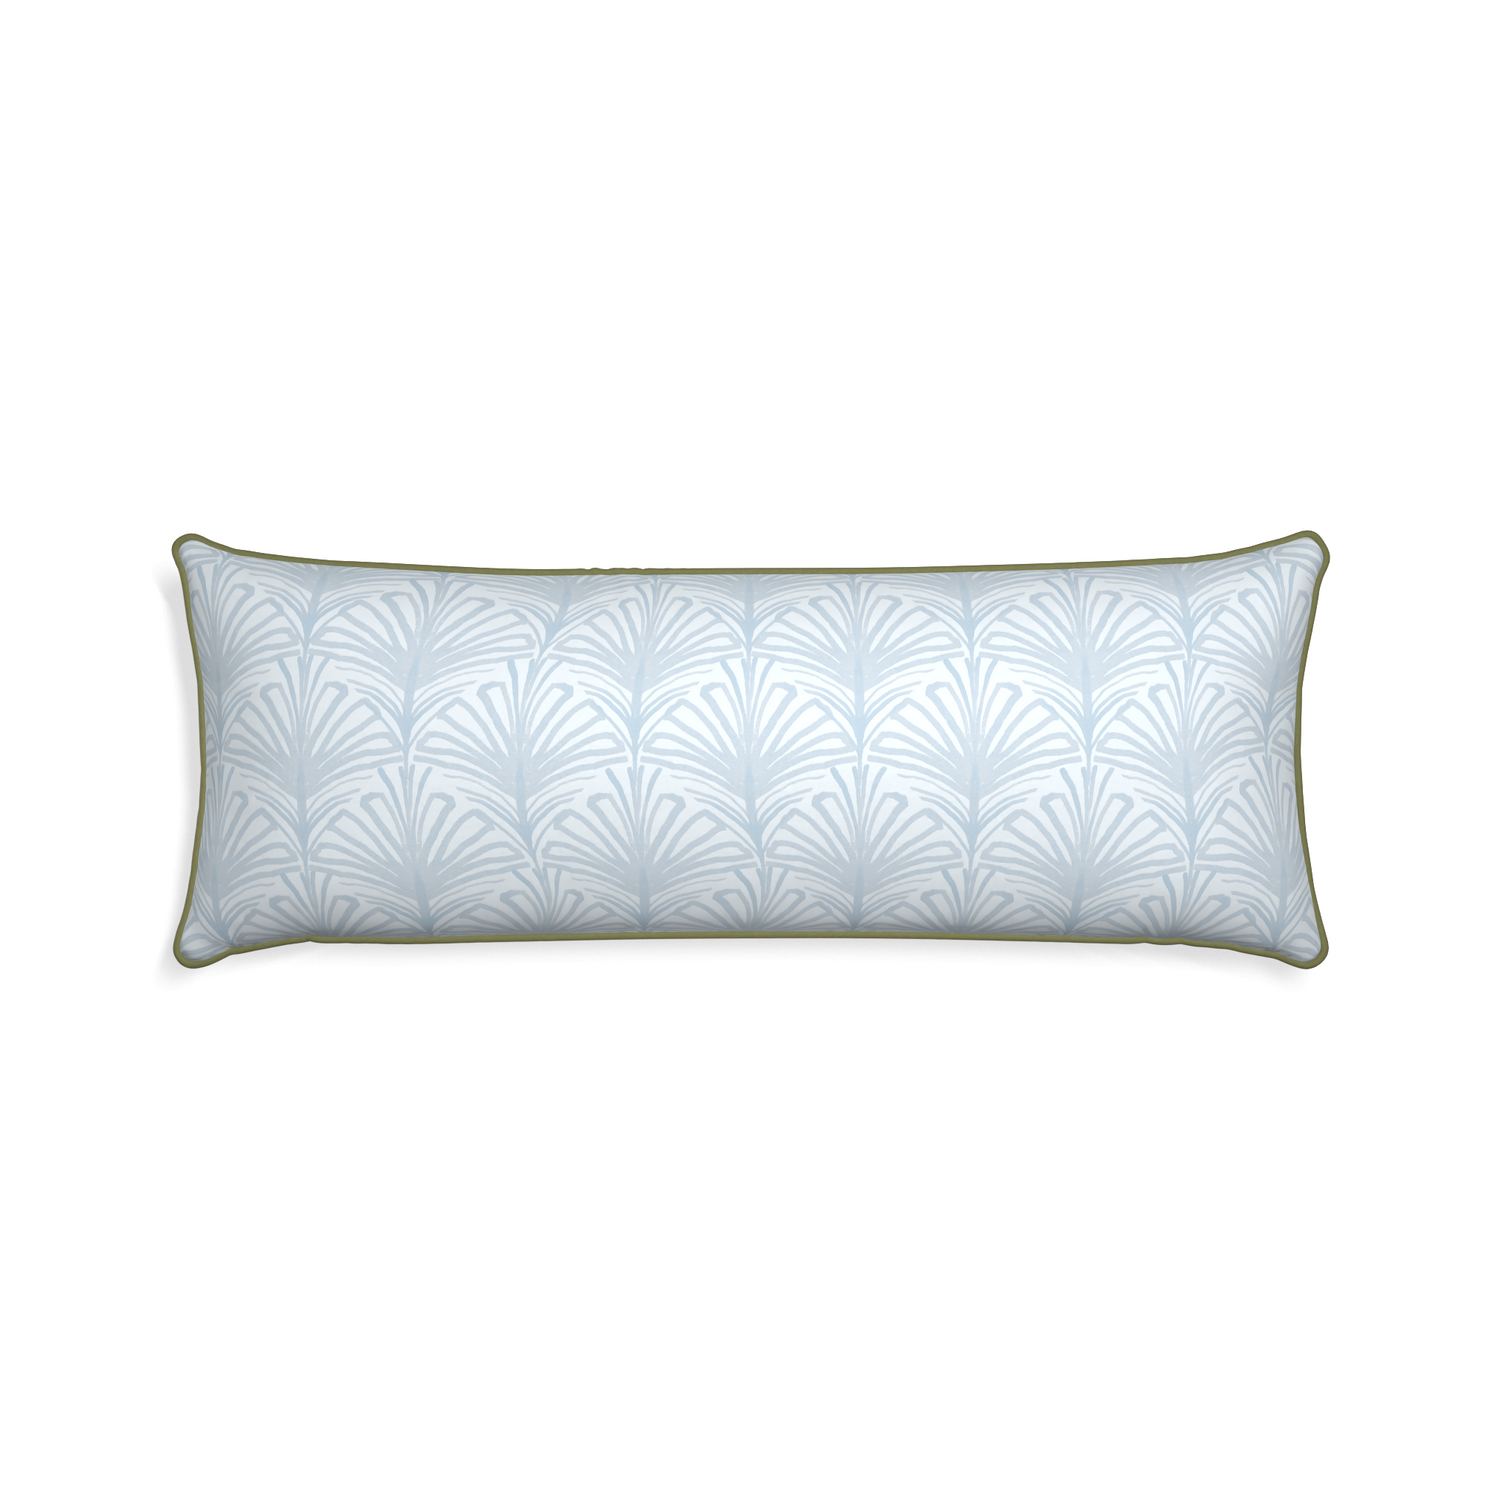 Xl-lumbar suzy sky custom pillow with moss piping on white background